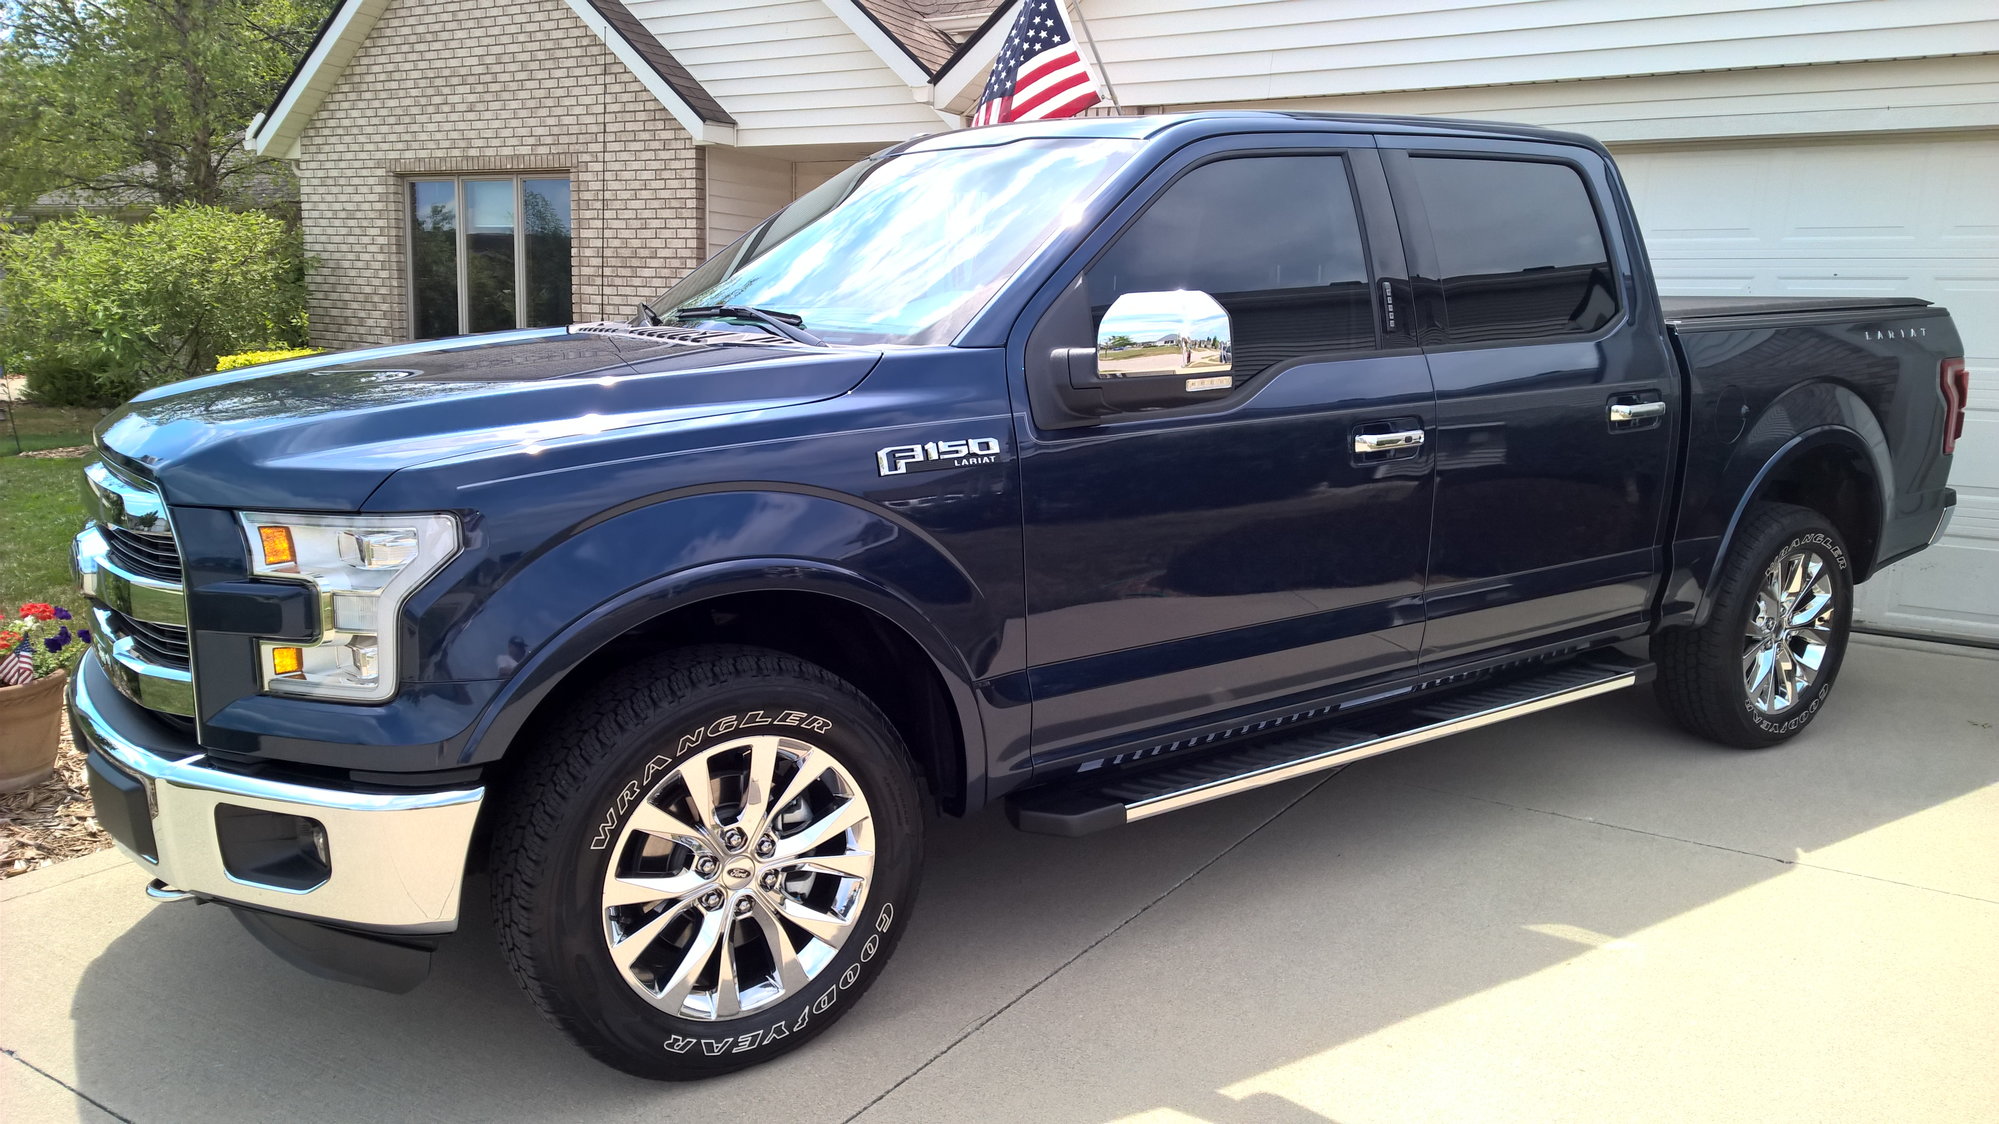 2014 Ford F 150 Stx Regular Cab 4x4 With A Custom Leveling Kit 20 Inch Nitto Tires Custom Window Tinting And A Durable Built Ford Tough Ford Trucks Ford F150